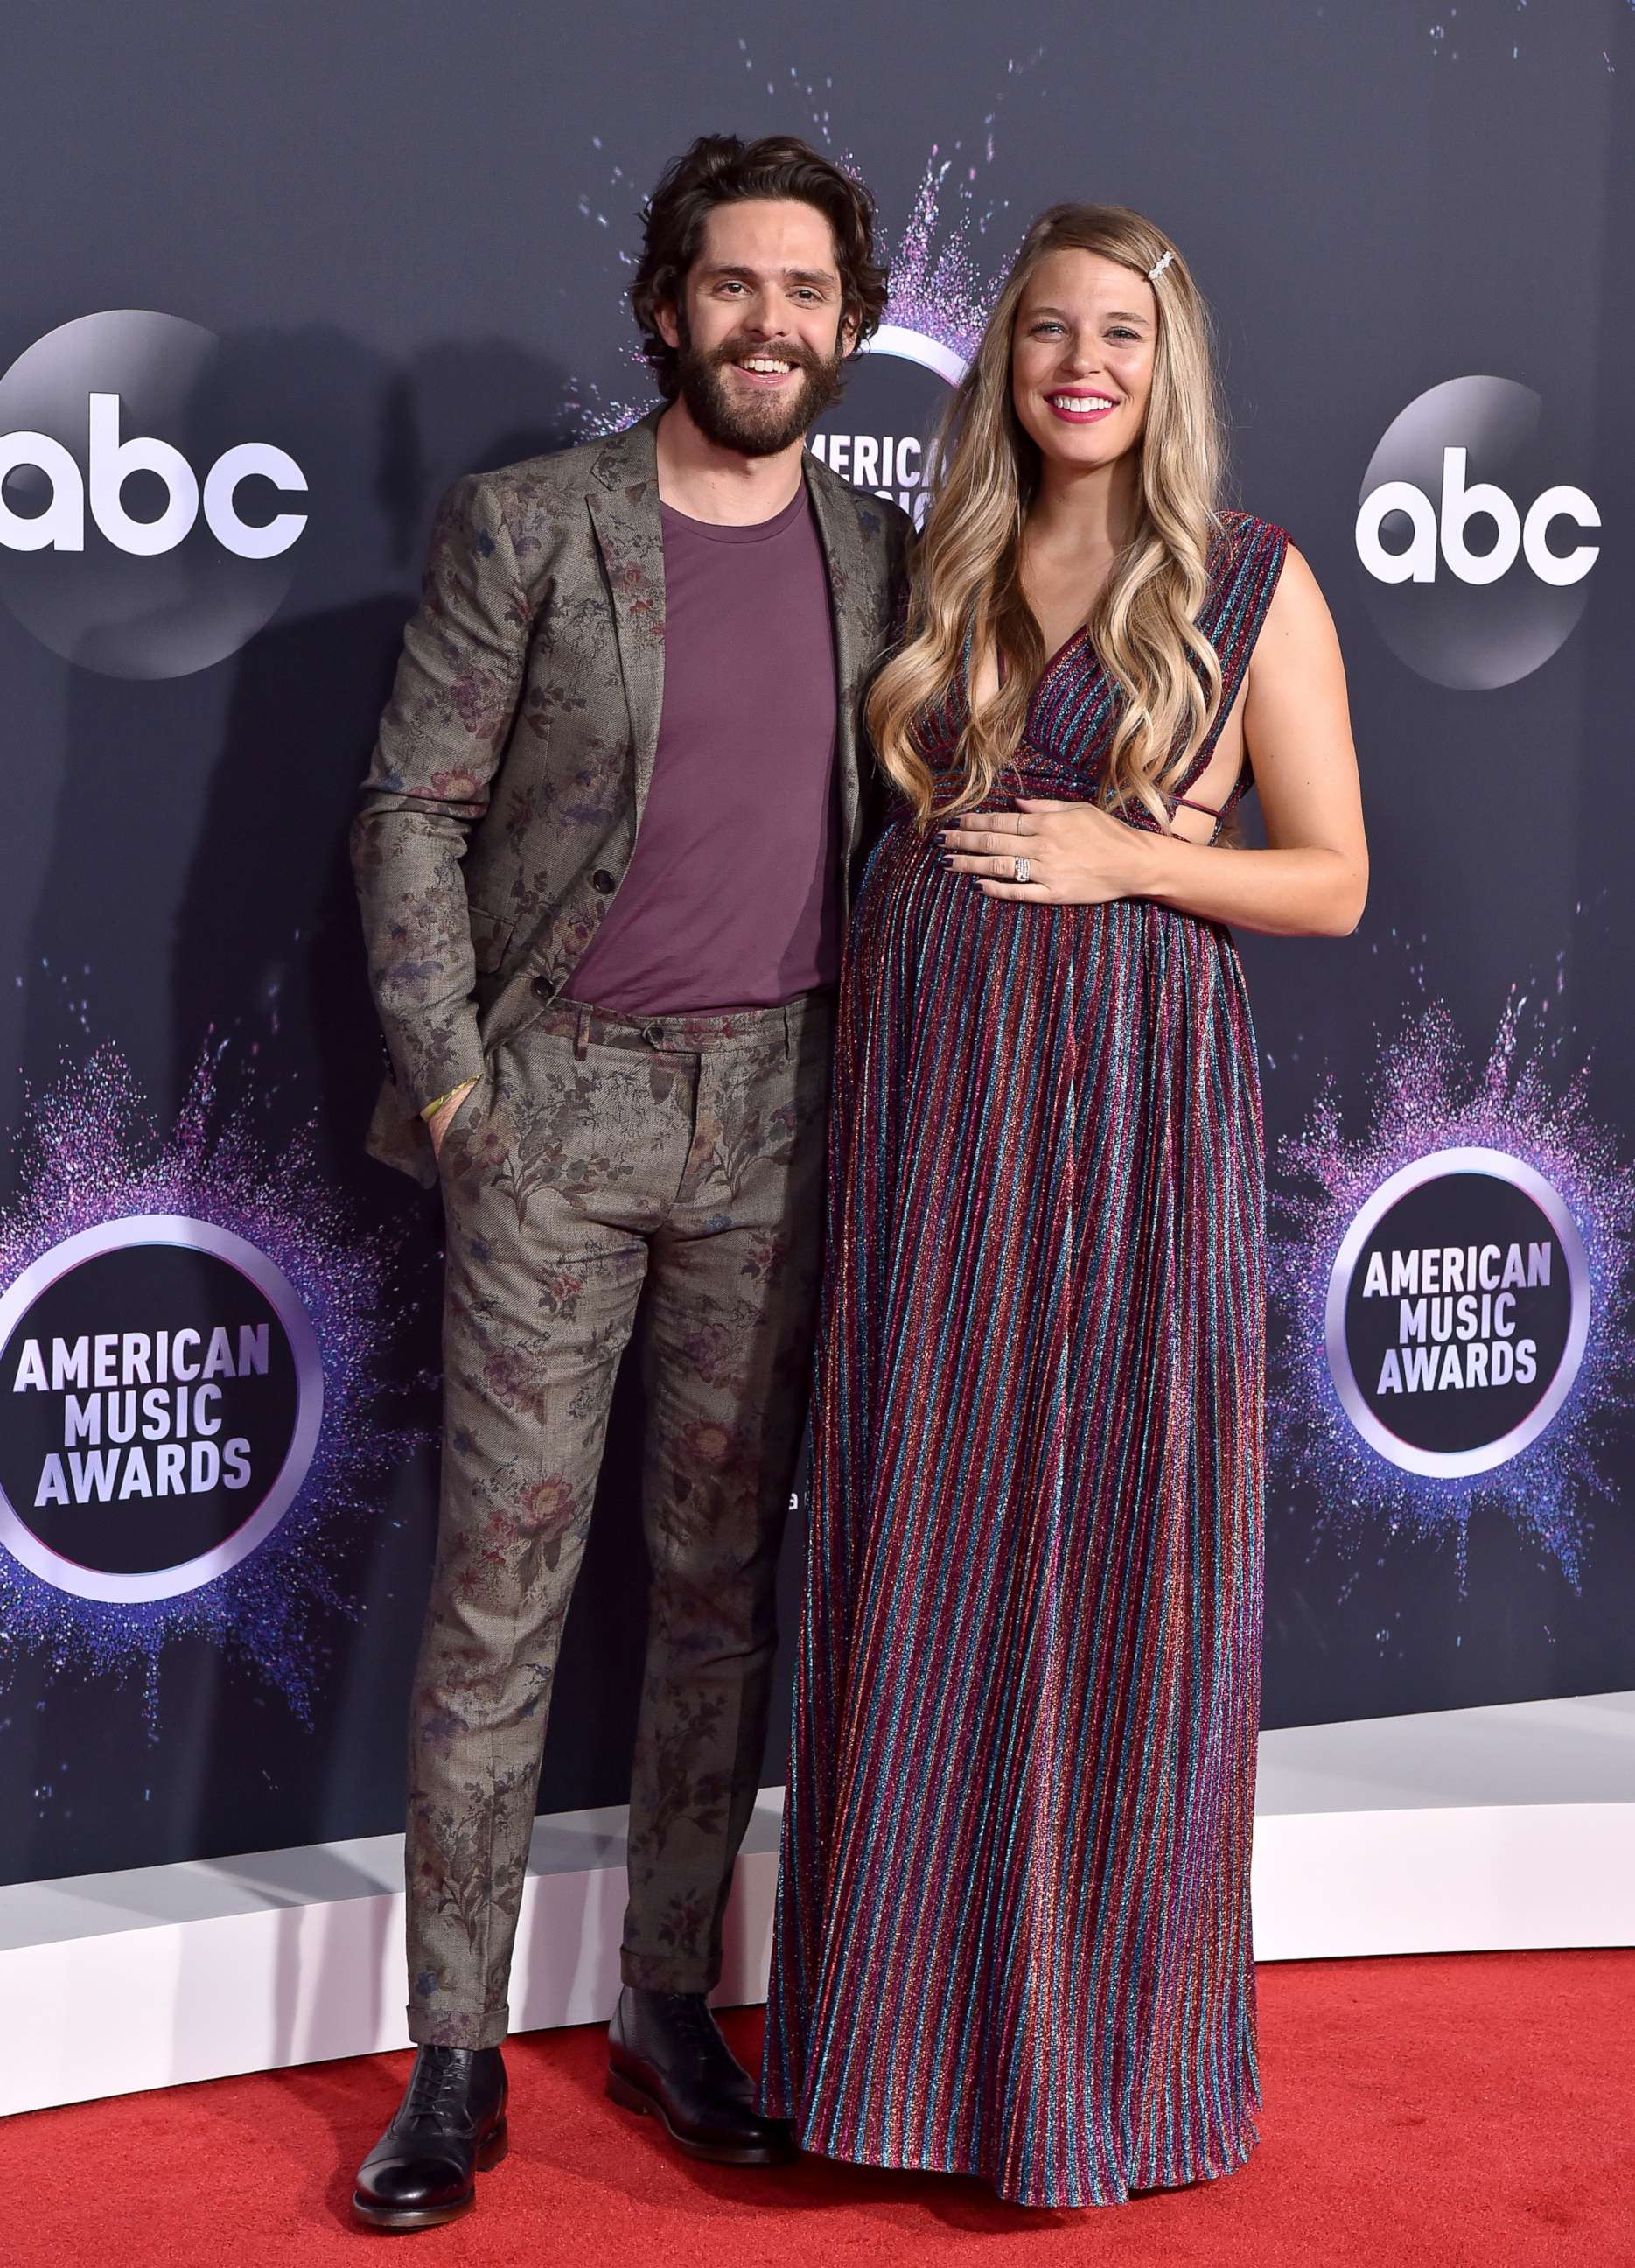 PHOTO: Thomas Rhett and Lauren Akins attend the 2019 American Music Awards at Microsoft Theater, Nov. 24, 2019 in Los Angeles.